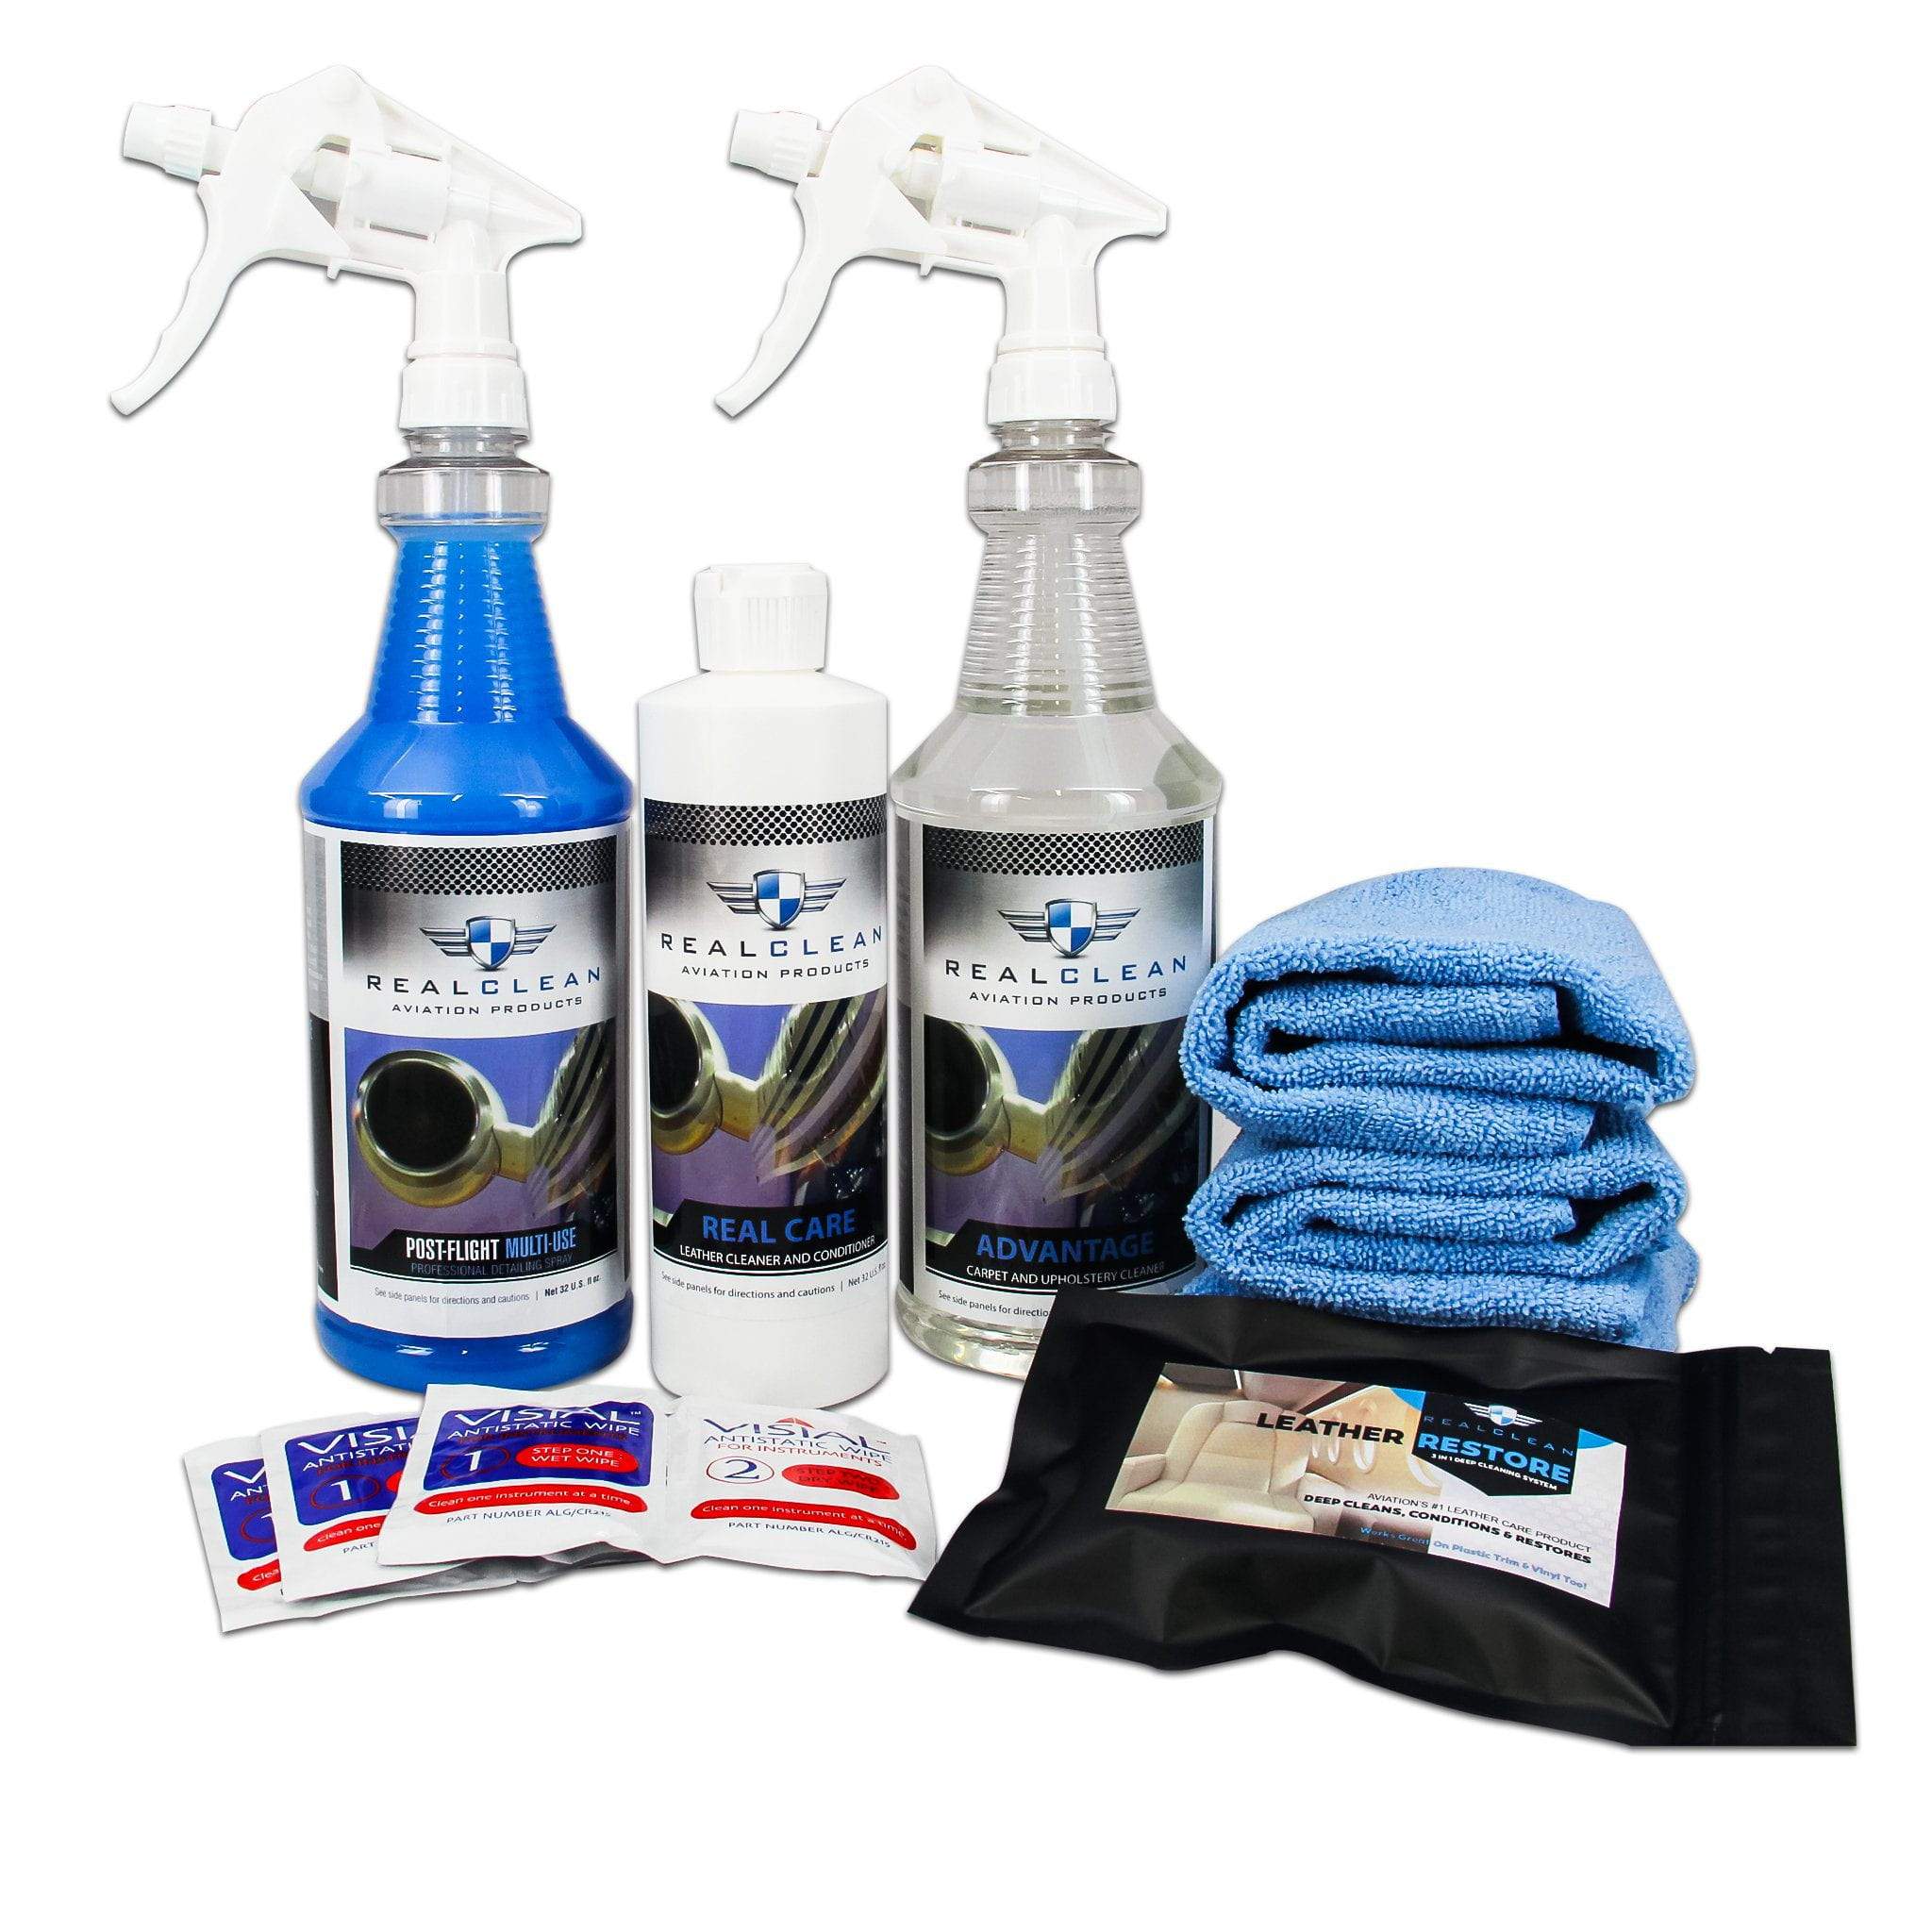 REAL CLEAN INTERIOR CLEANING KIT